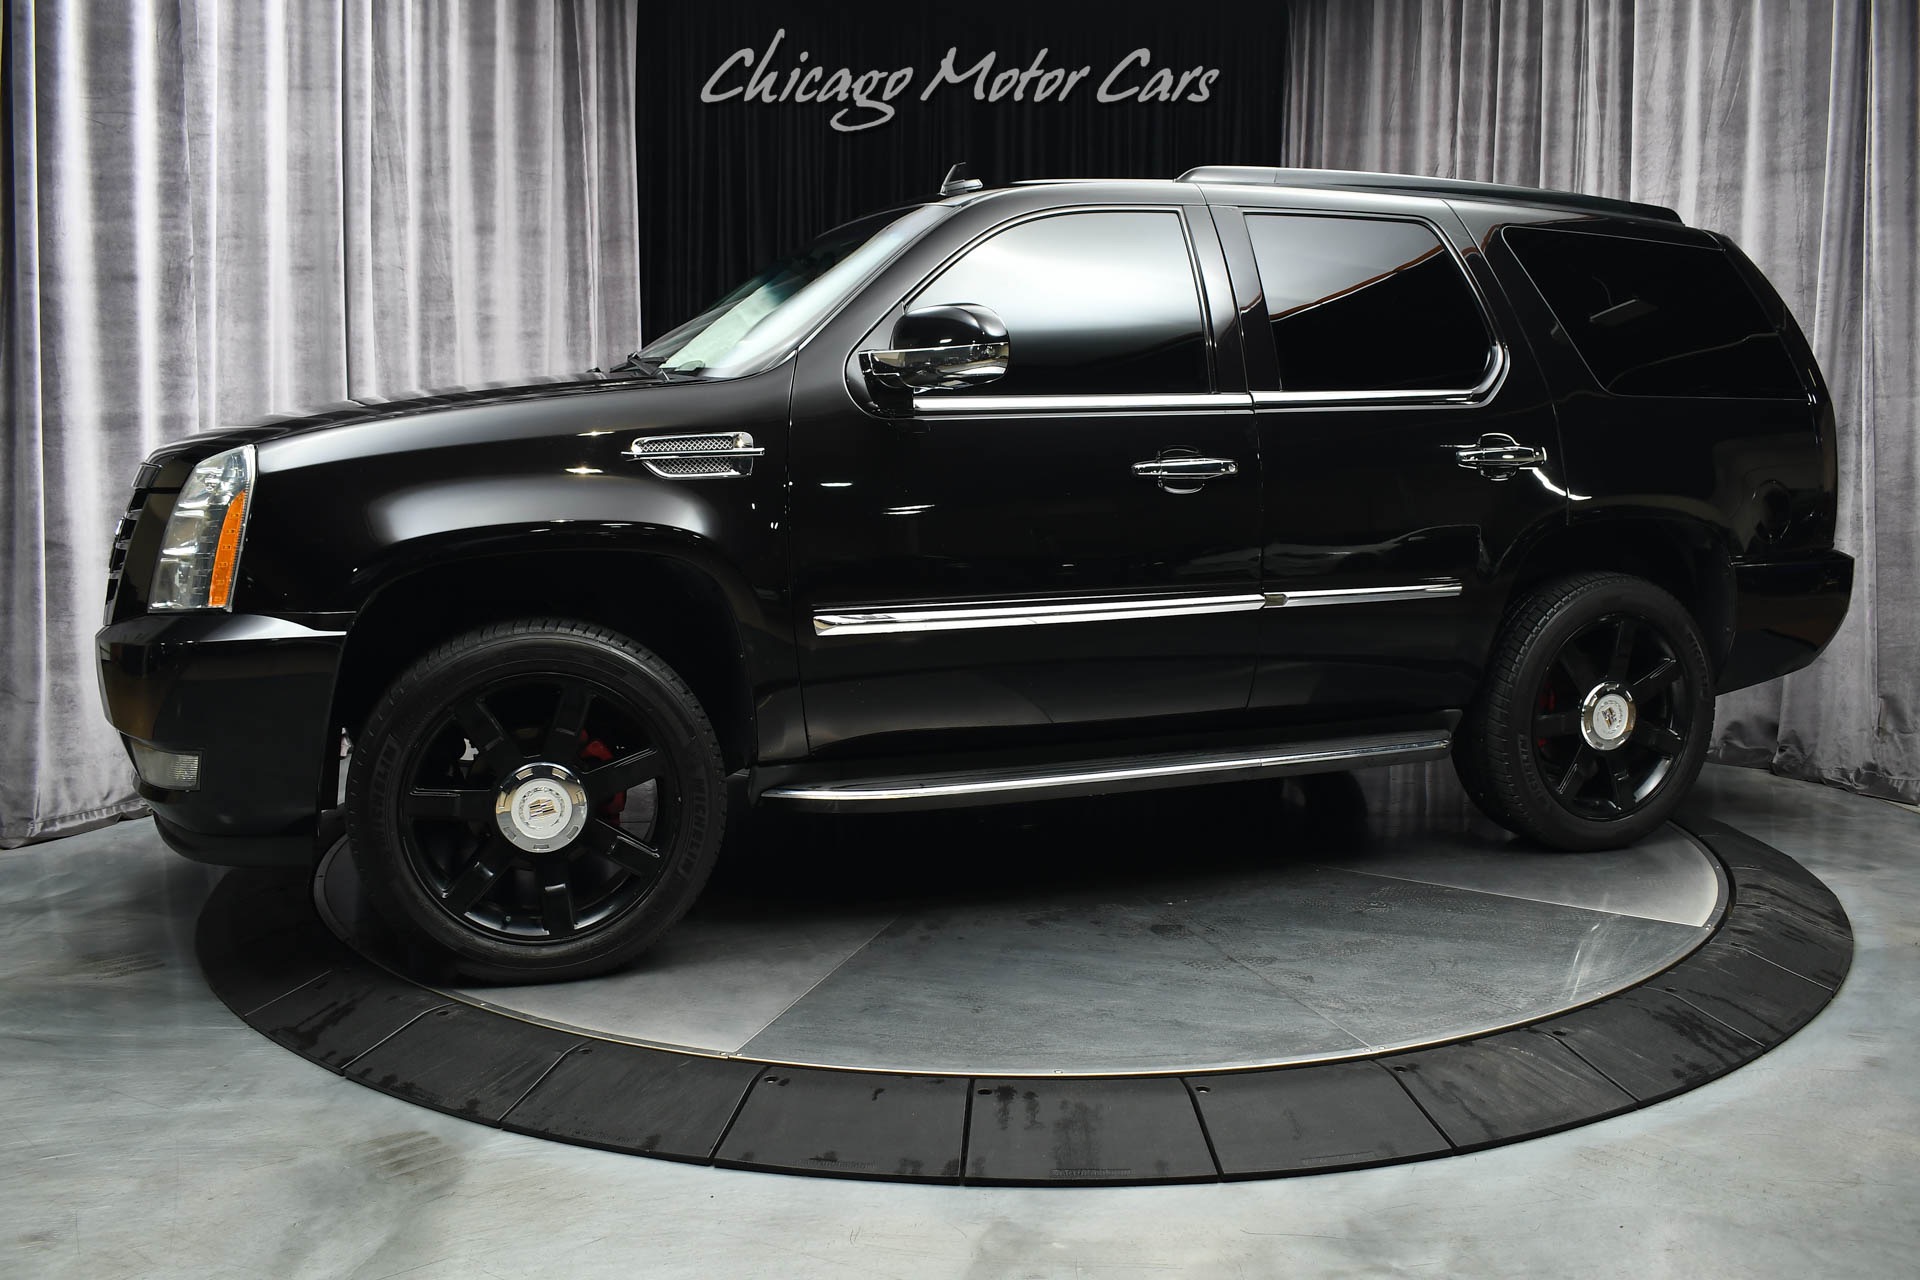 Used 2010 Cadillac Escalade SUV Rear Entertainment! Black on Black! Heated  Front & Rear Seats! For Sale (Special Pricing) | Chicago Motor Cars Stock  #19977